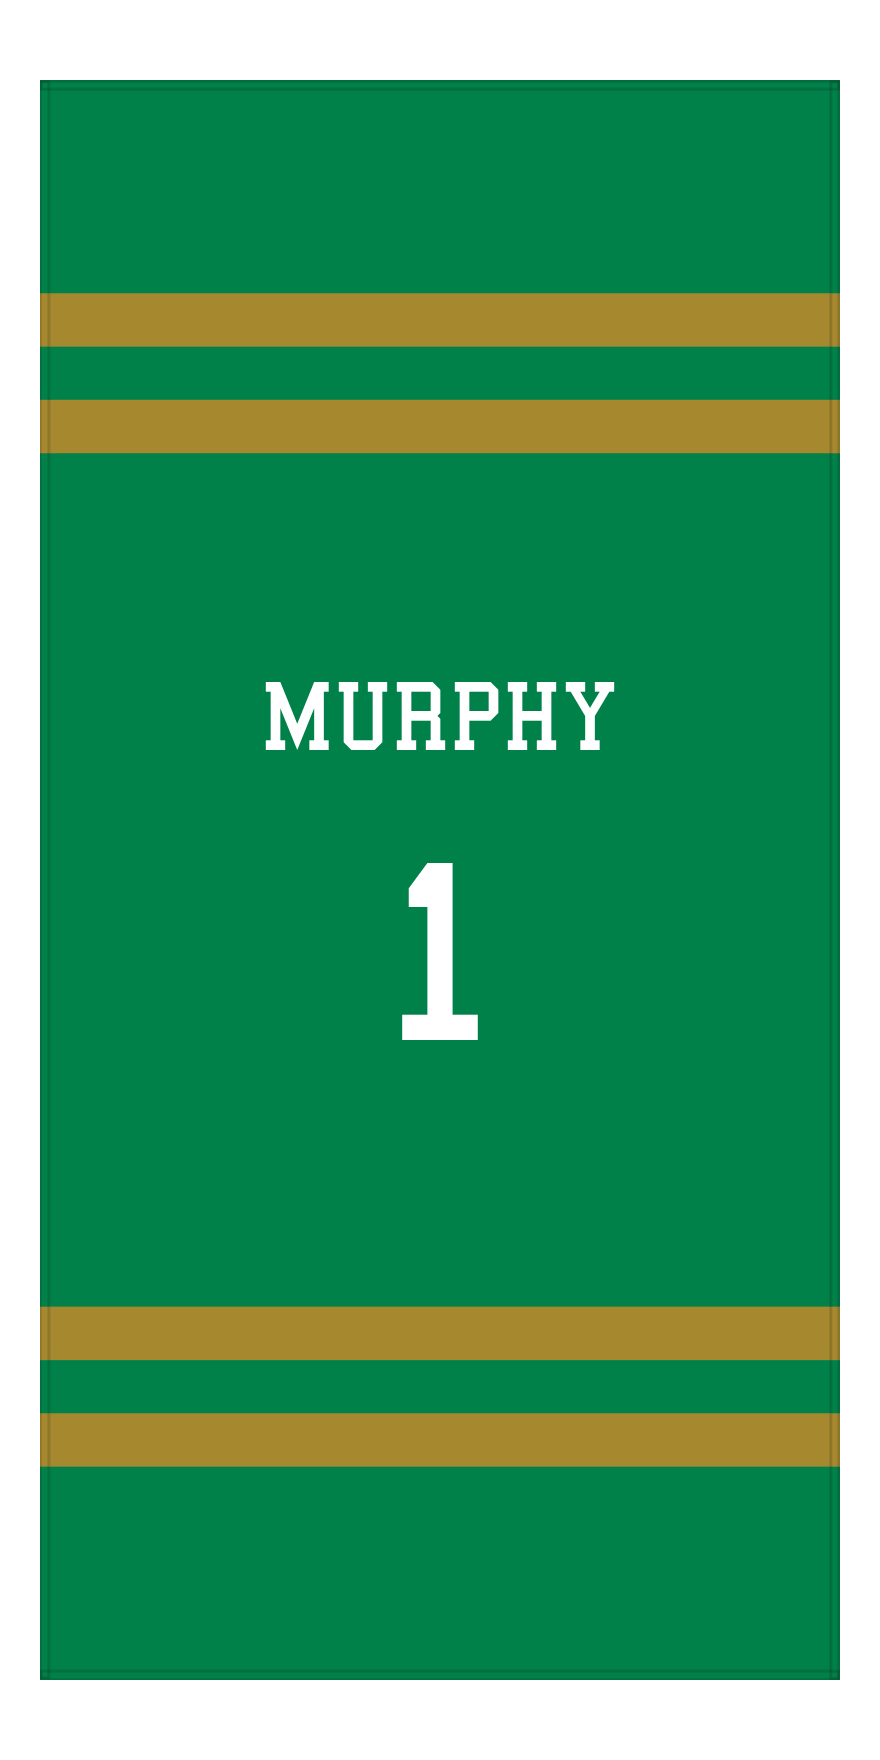 Personalized Jersey Number 2-on-none Stripes Sports Beach Towel - Green and Gold - Vertical Design - Front View